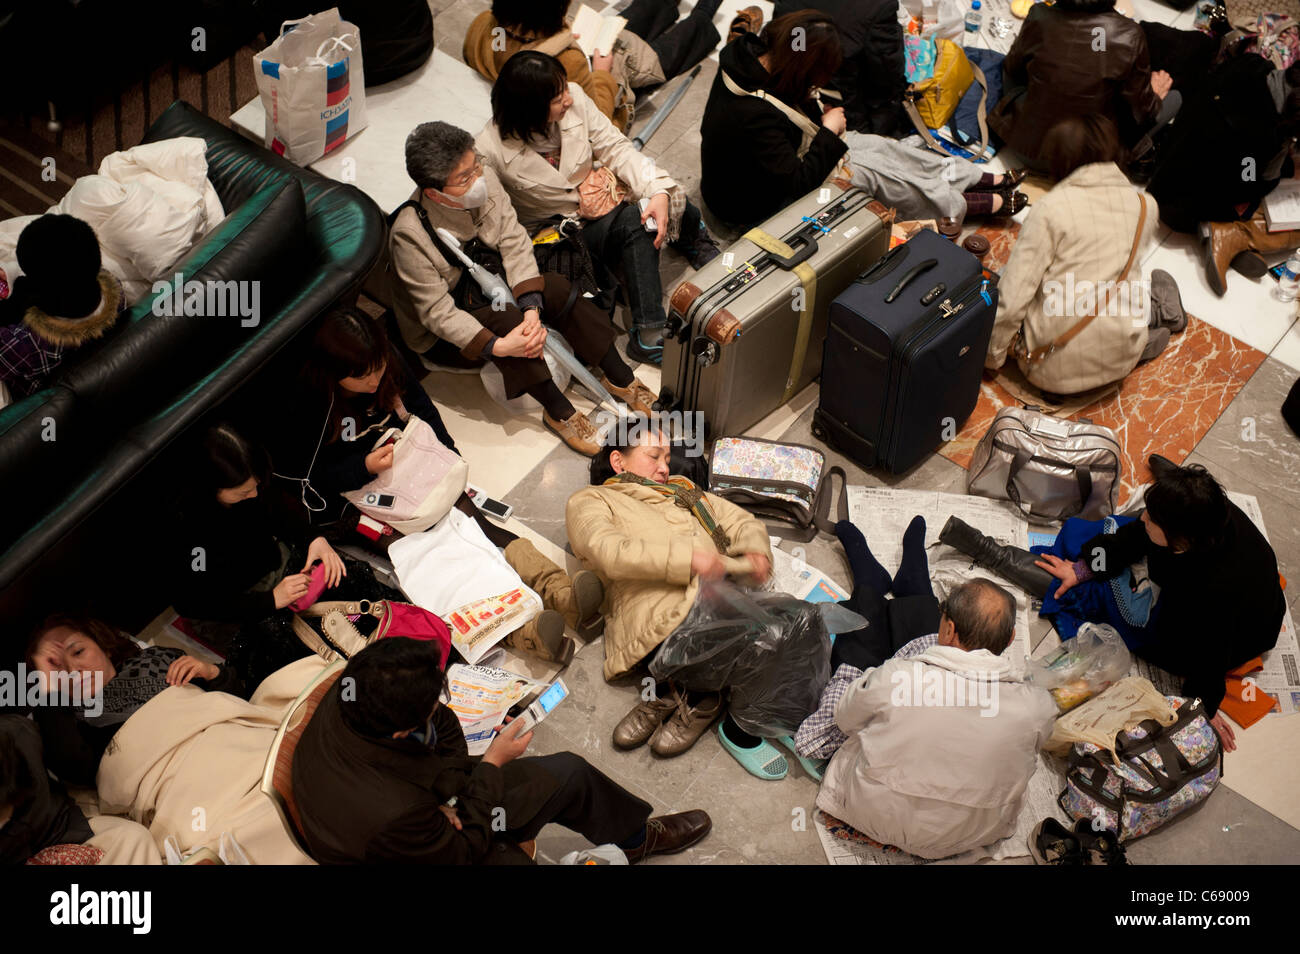 People taking refuge in a the Prince Hotel, Shinagawa,Tokyo, 11 March 2011. following a huge earthquake in north-east Japan Stock Photo